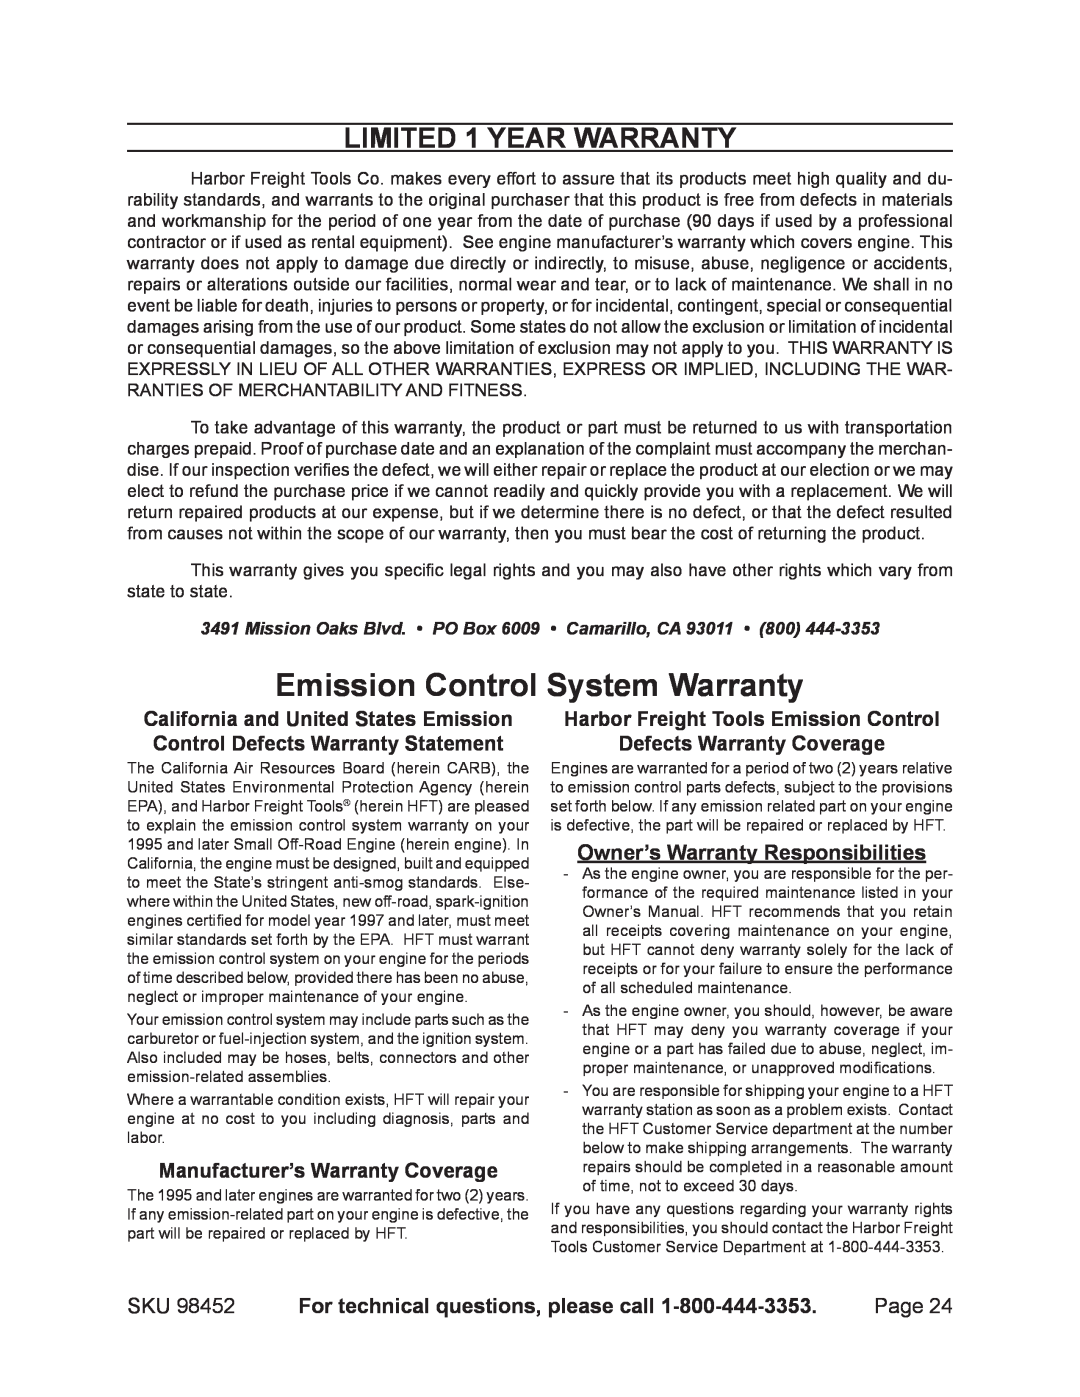 Chicago Electric 98452 Emission Control System Warranty, Limited 1 year warranty, Owner’s Warranty Responsibilities 